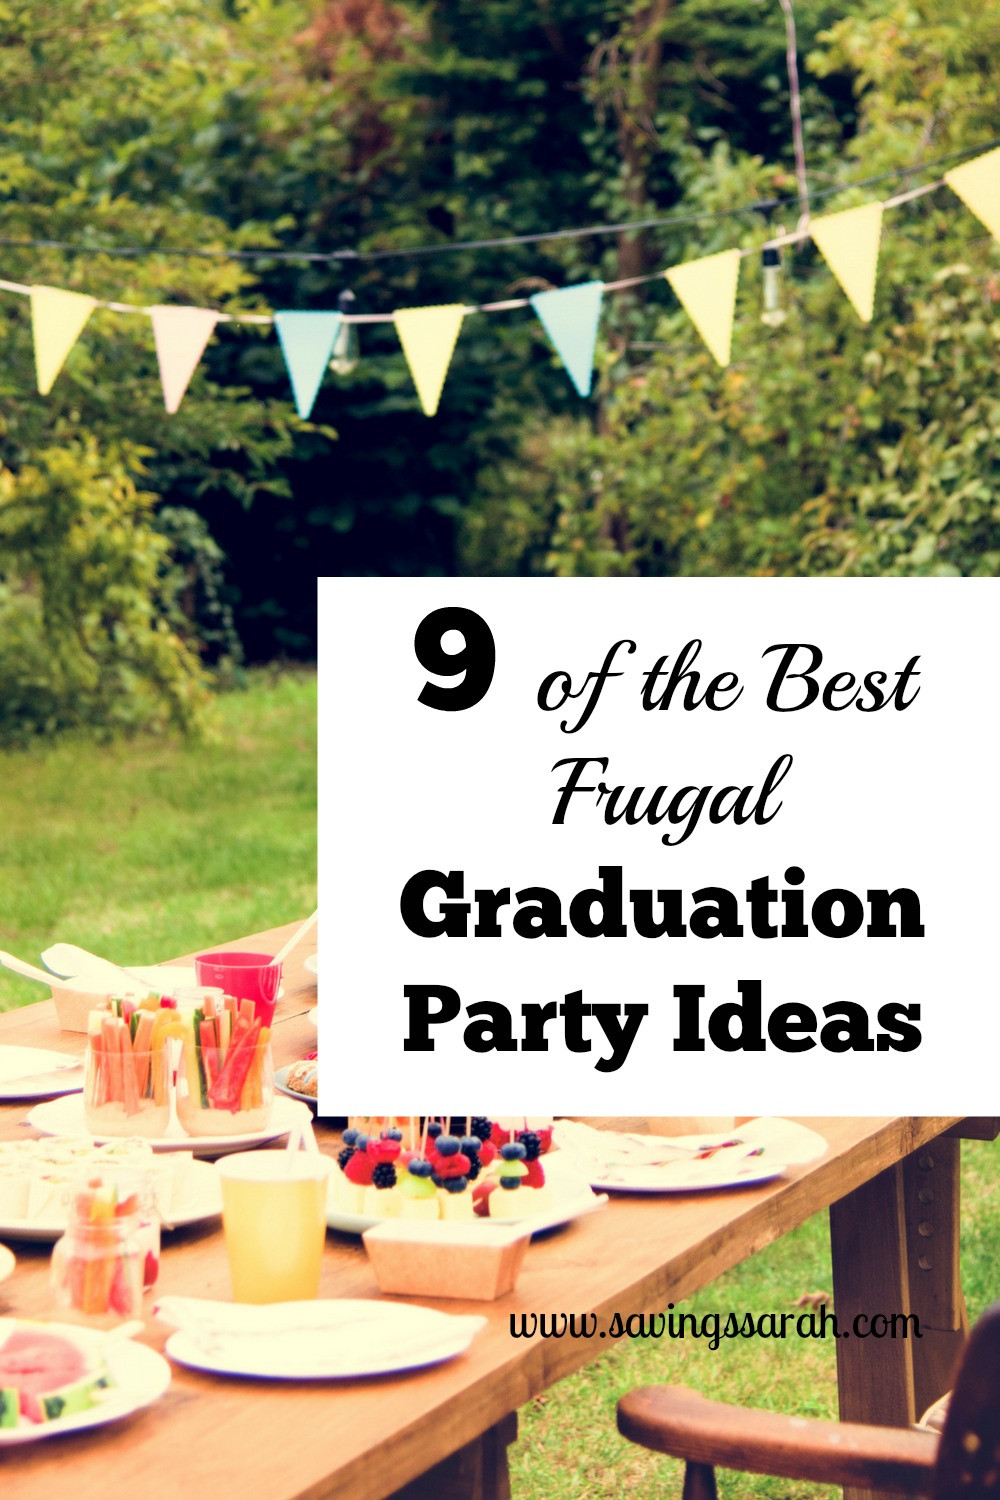 Backyard Party Ideas On Pinterest
 9 the Best Frugal Graduation Party Ideas Earning and